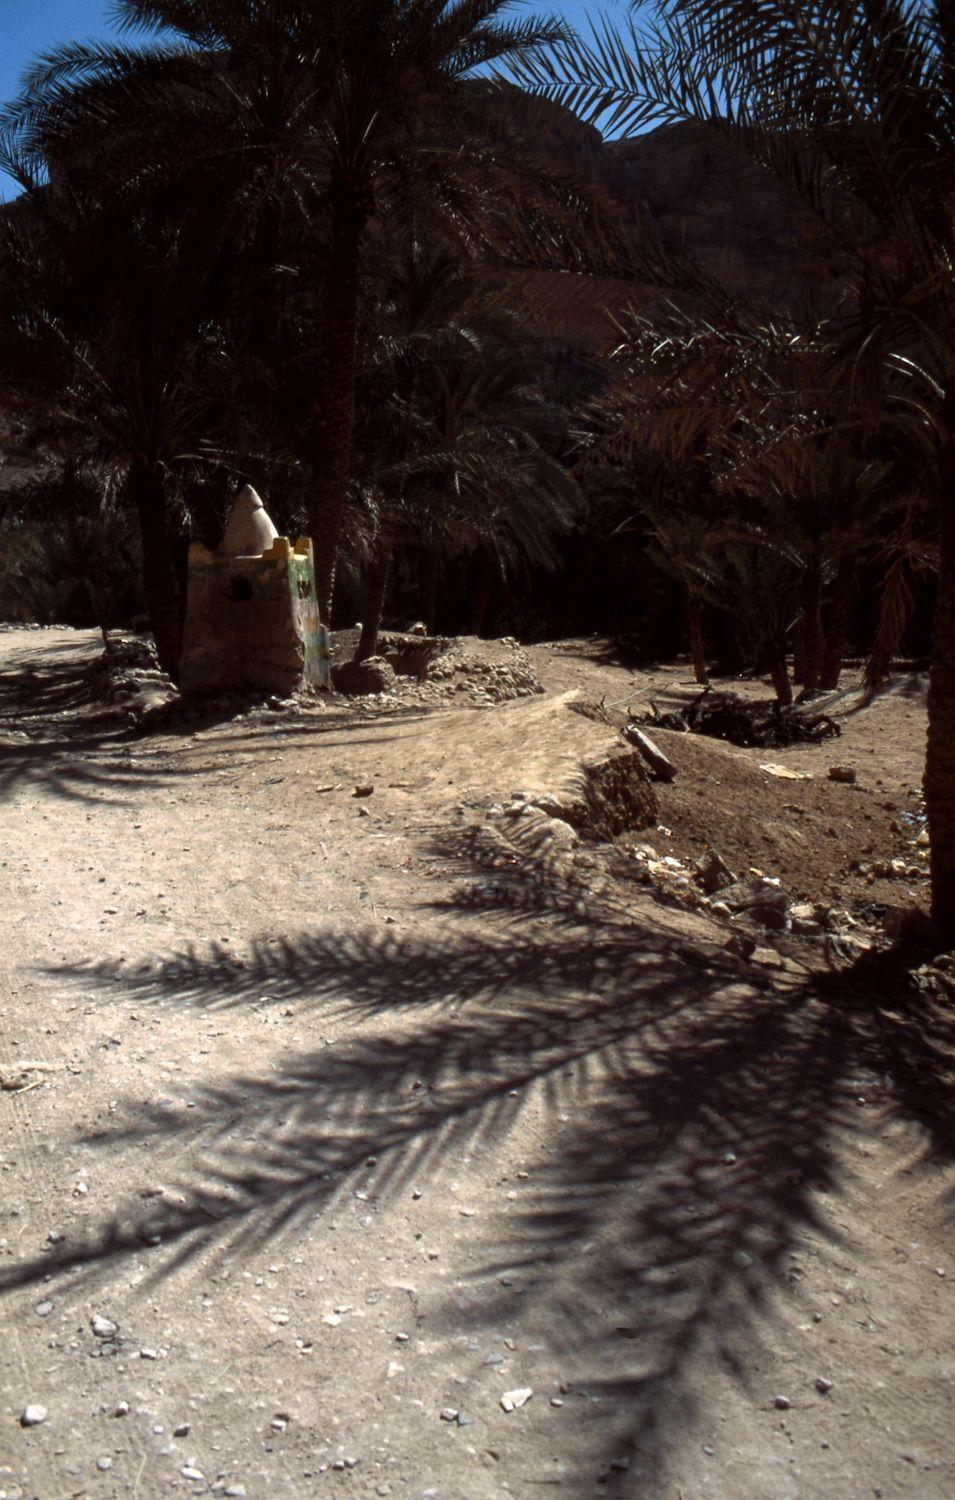 Peggy Crawford - Wadi Doan un Khoreibe. Small monument in a palm grove on the road between Wadi Doan and Al Khuraybah